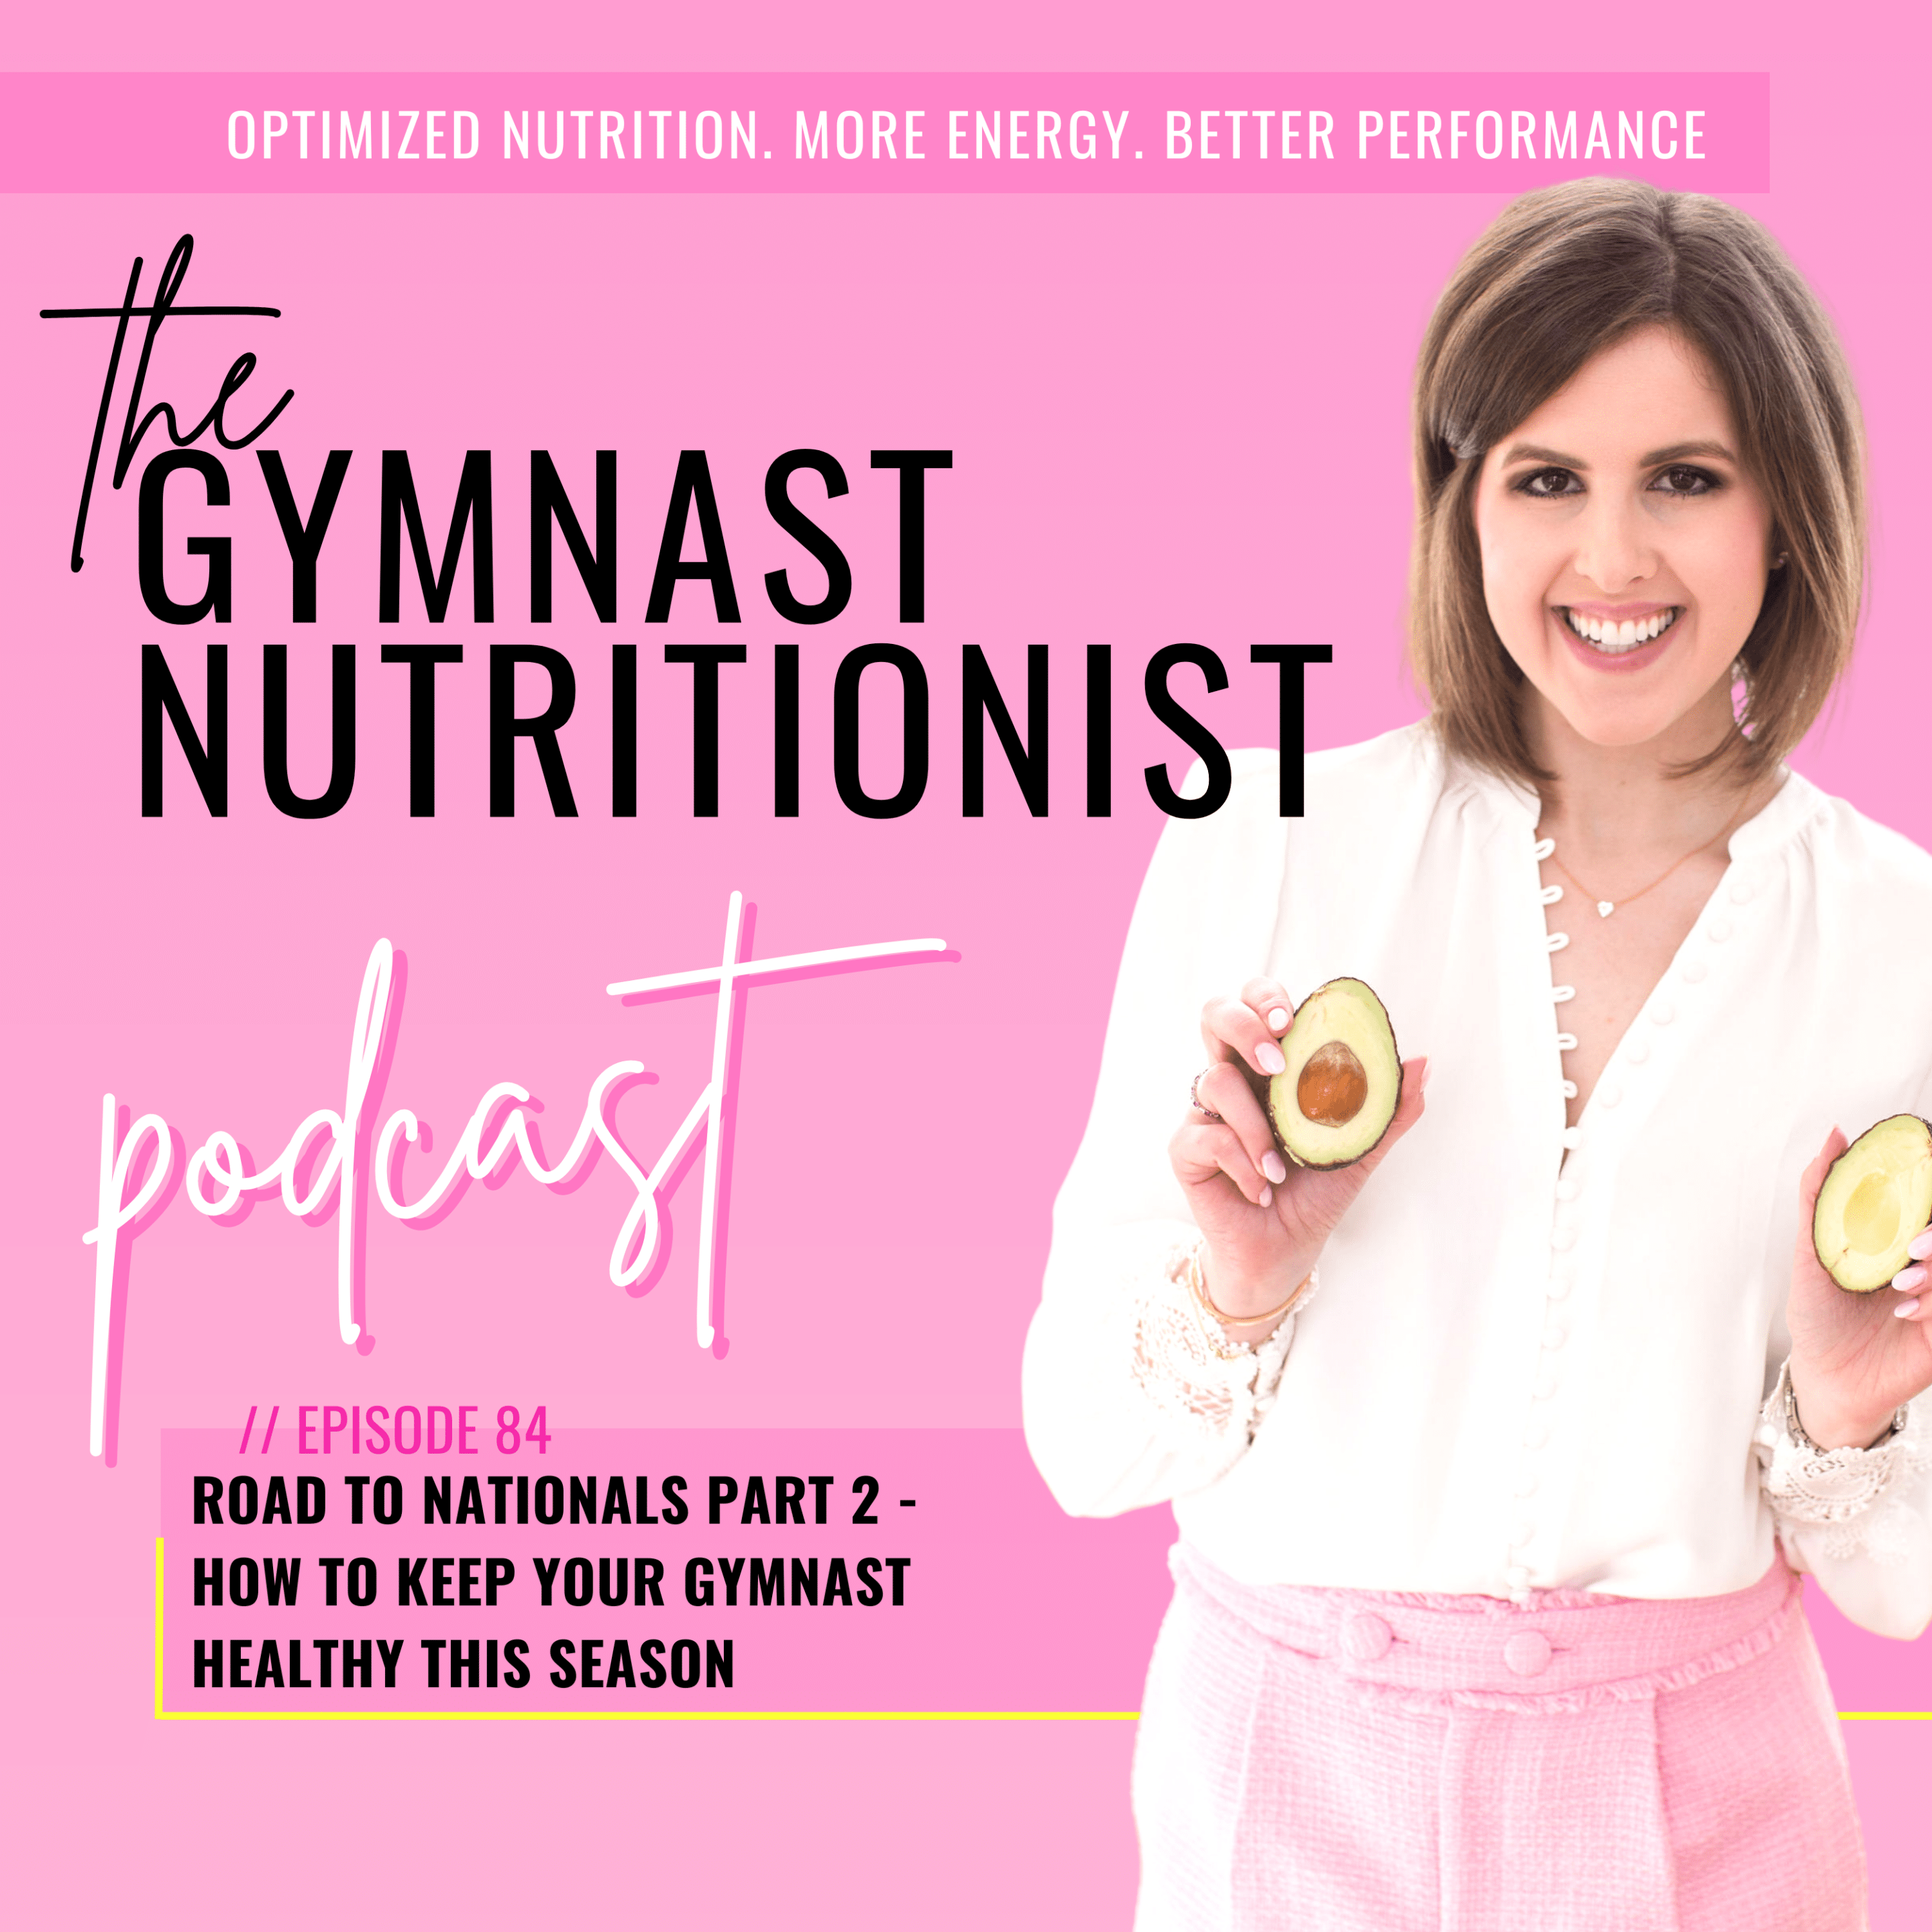 Episode 84: Road to Nationals Part 2 - How to Keep your Gymnast Healthy this Season